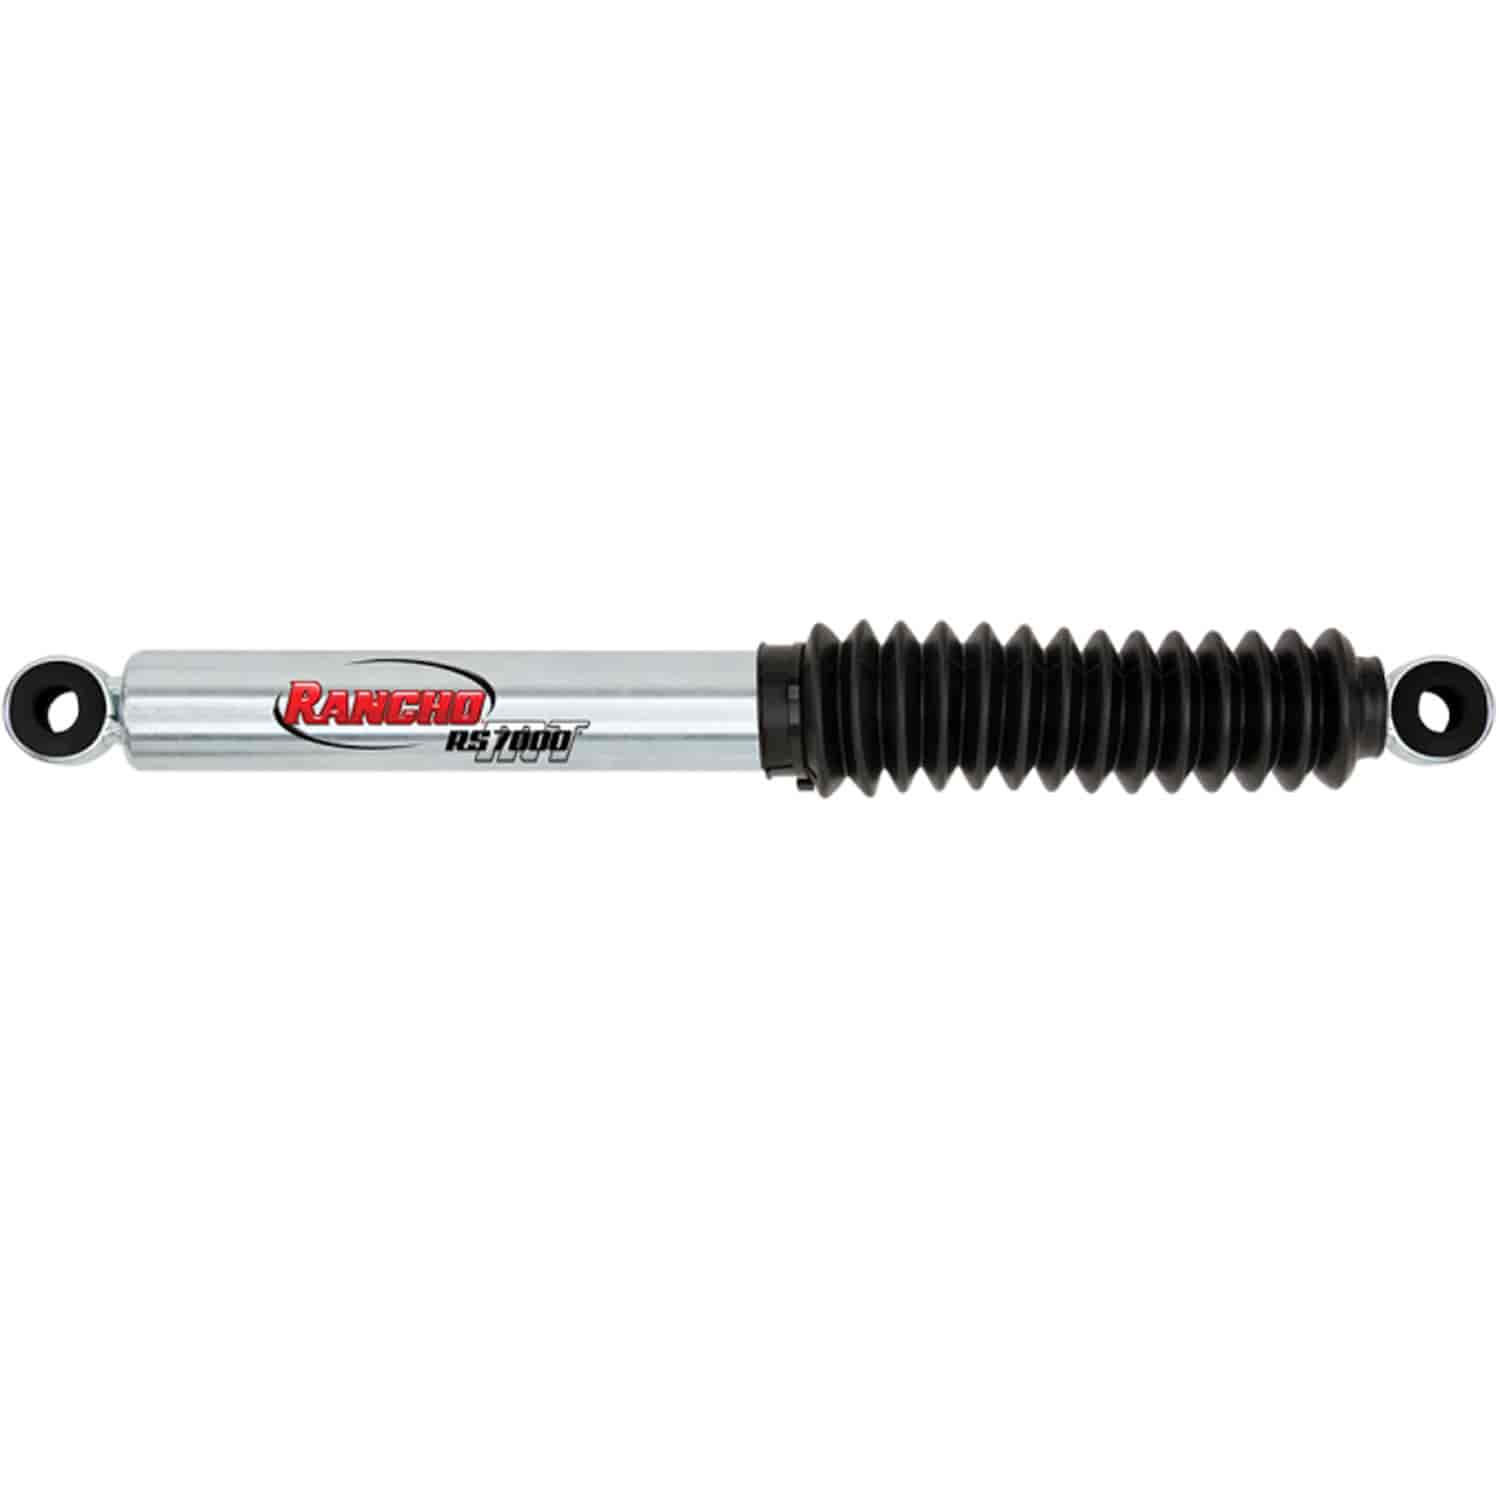 RS7000MT Front OR Rear Shock Fits Dodge, International, Jeep, Suzuki, Toyota and Willys Vehicles